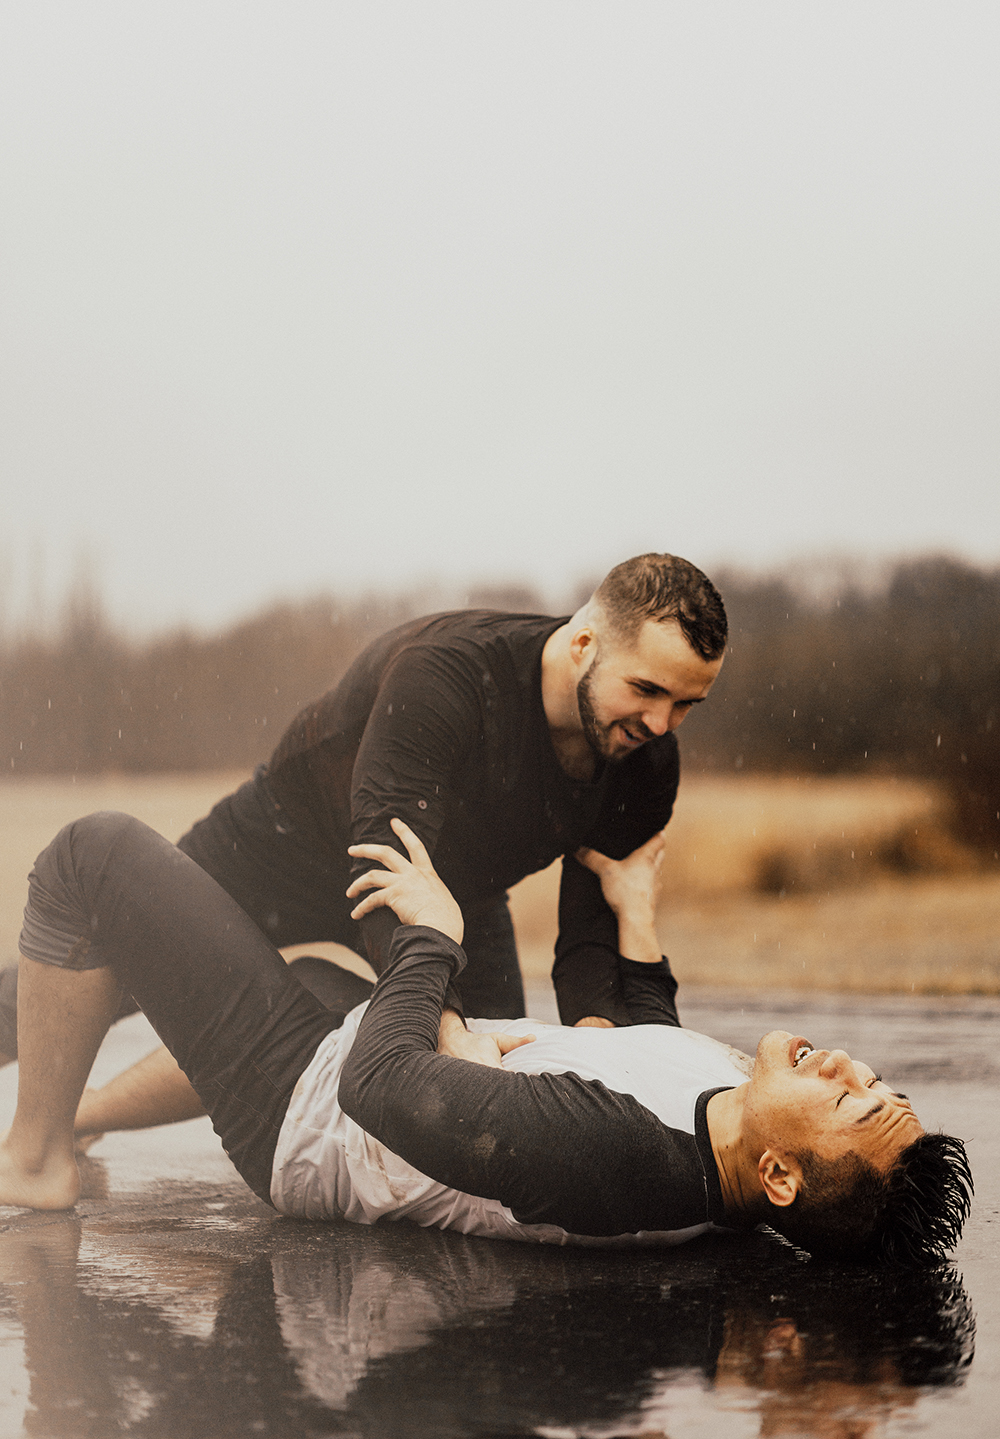 https://equallywed.com/wp-content/uploads/2018/04/Romantic-couples-photo-shoot-in-the-pouring-rain-Equally-Wed-8.jpg